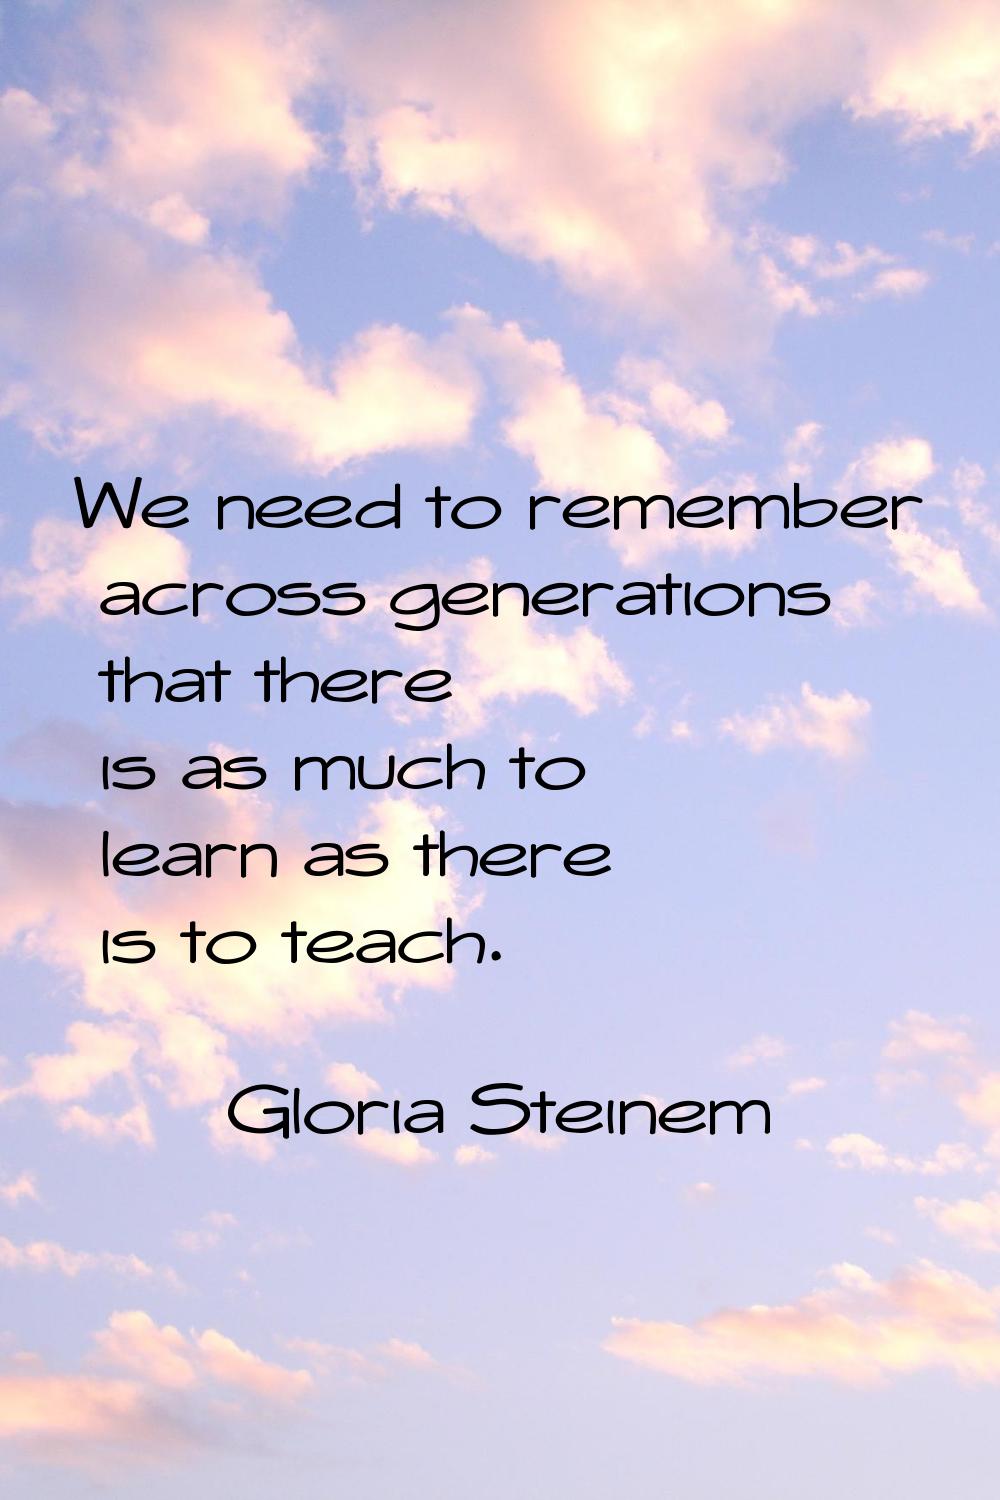 We need to remember across generations that there is as much to learn as there is to teach.